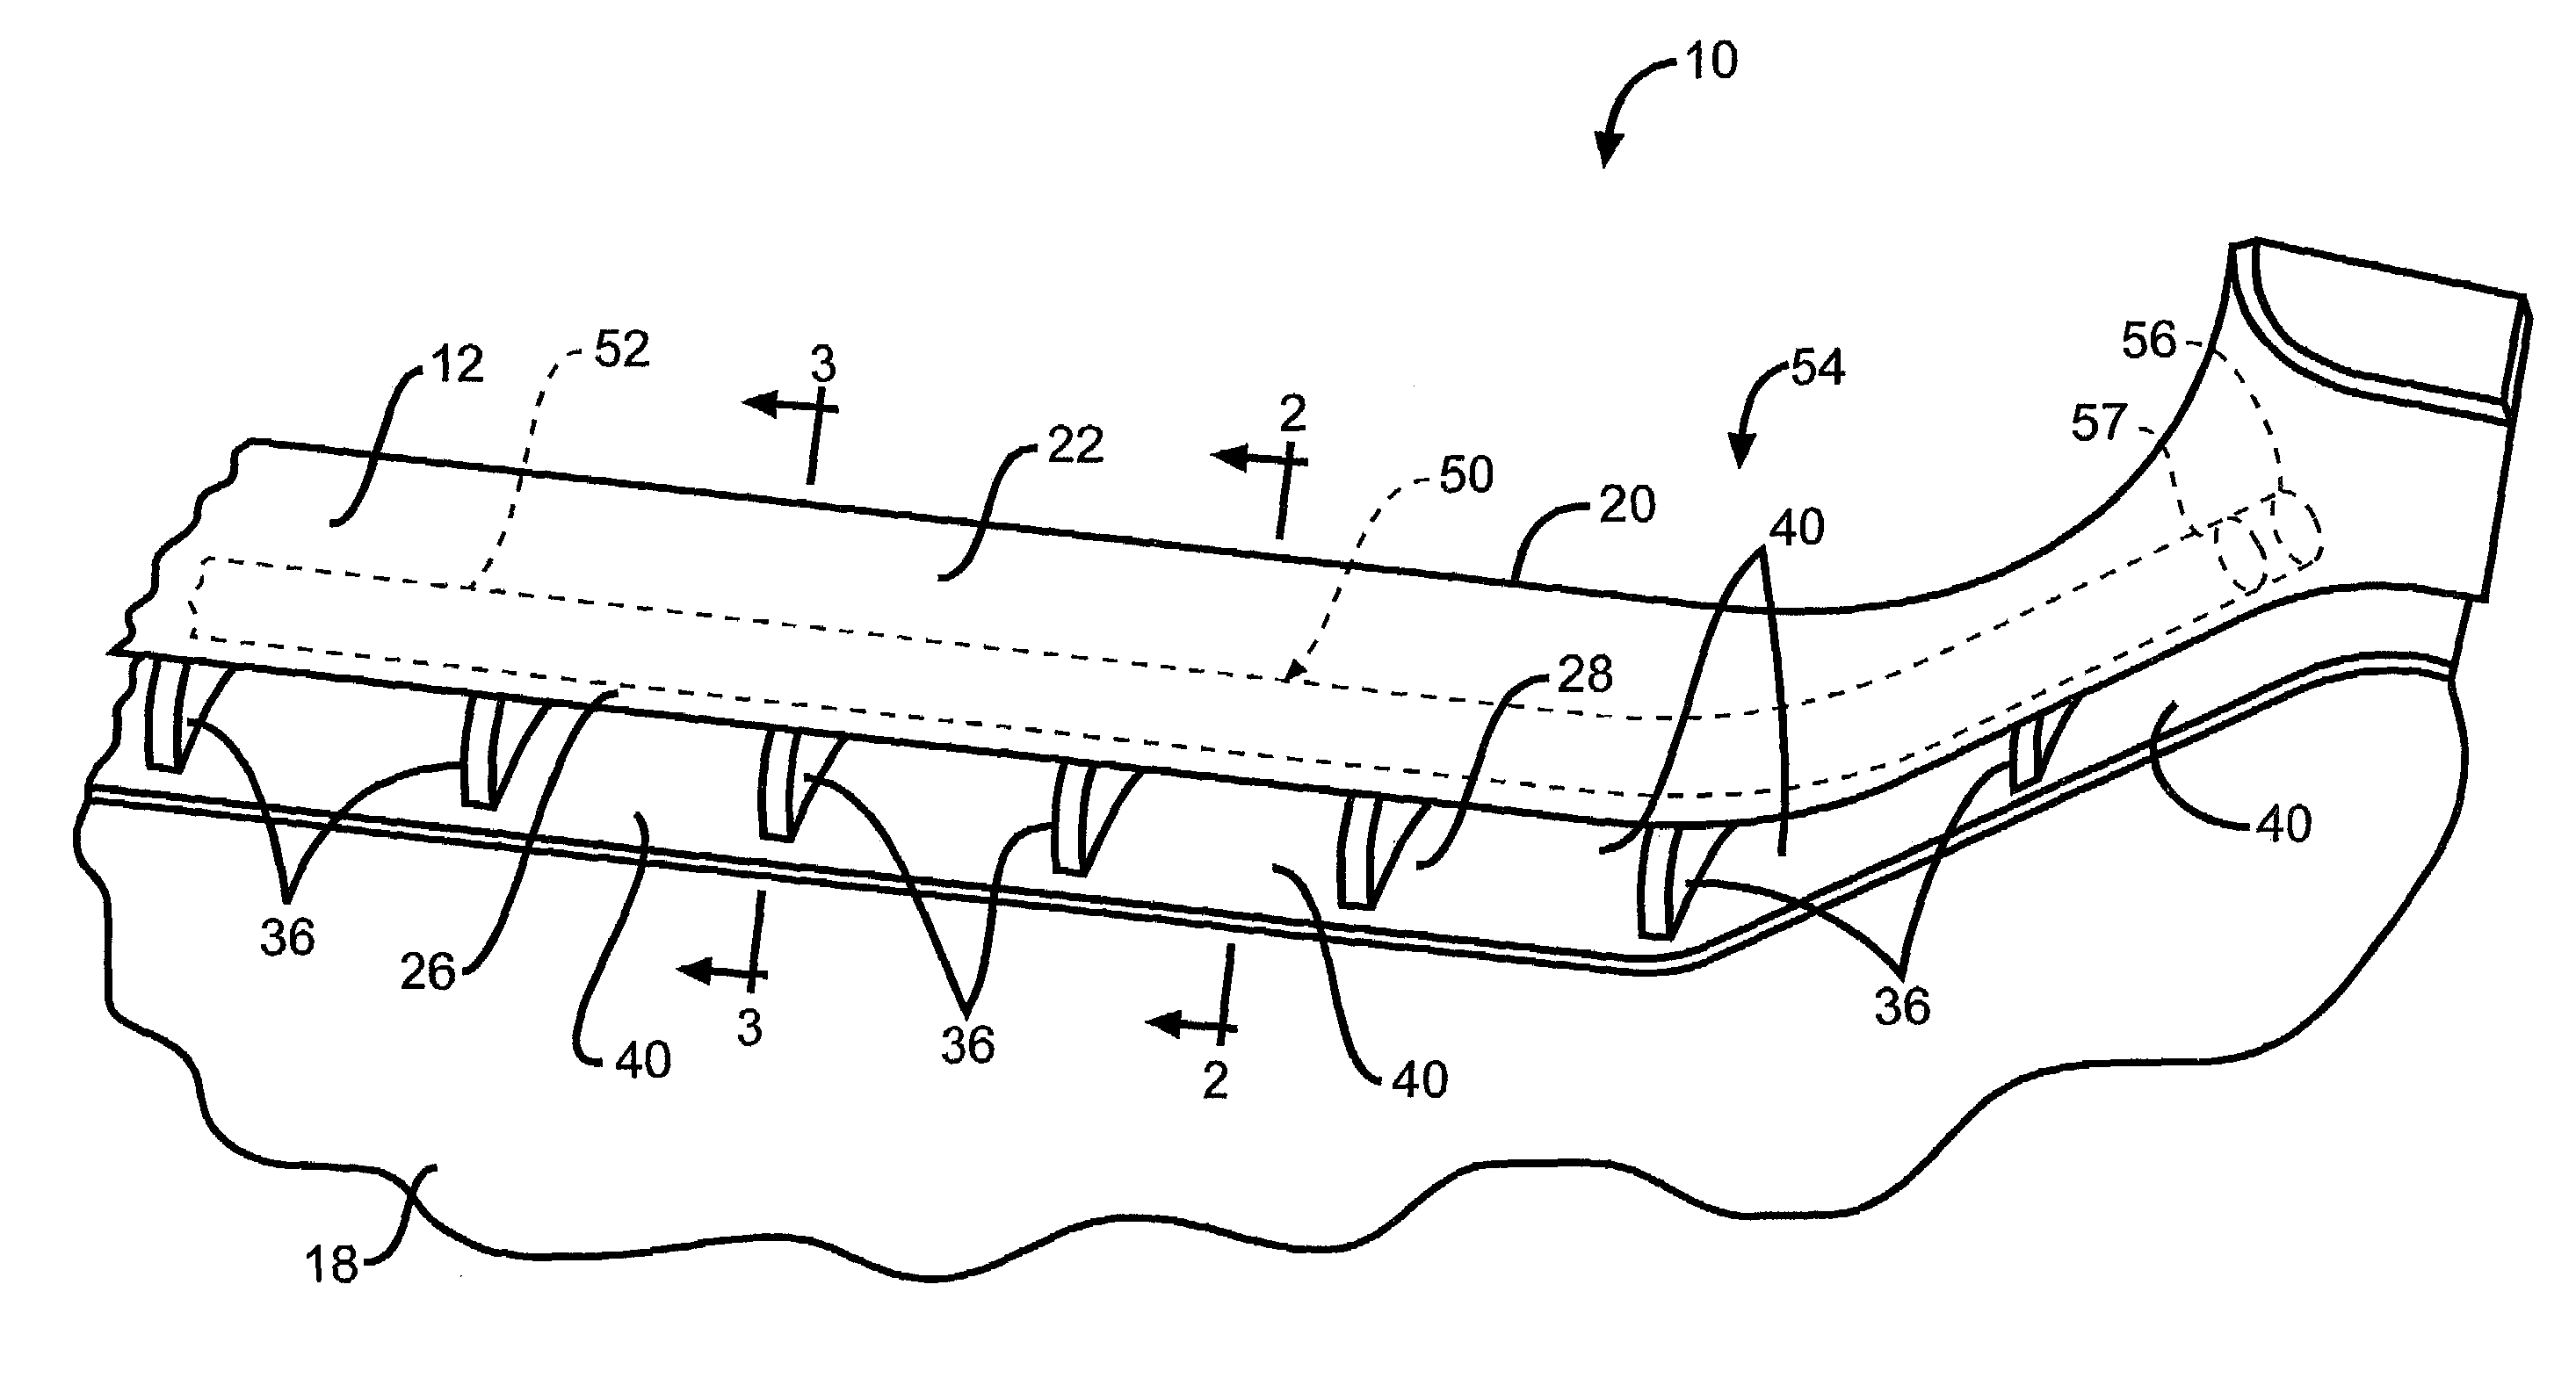 Trim component with mounted light source for indirectly lighting the interior of a vehicle